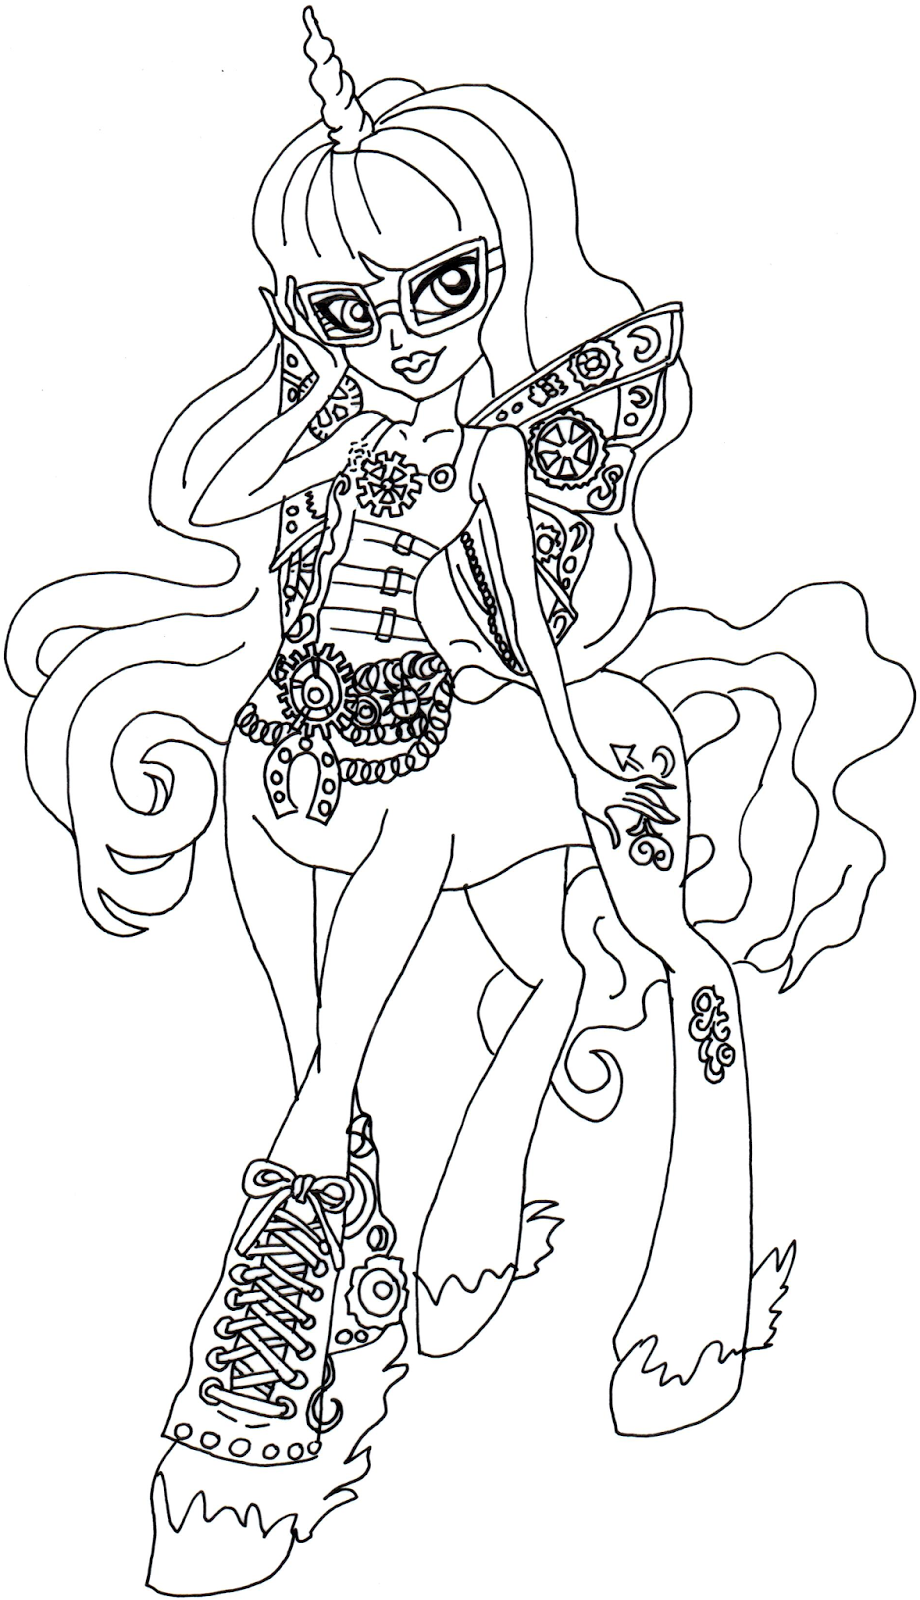 Free Printable Monster High Coloring Pages: November 2015